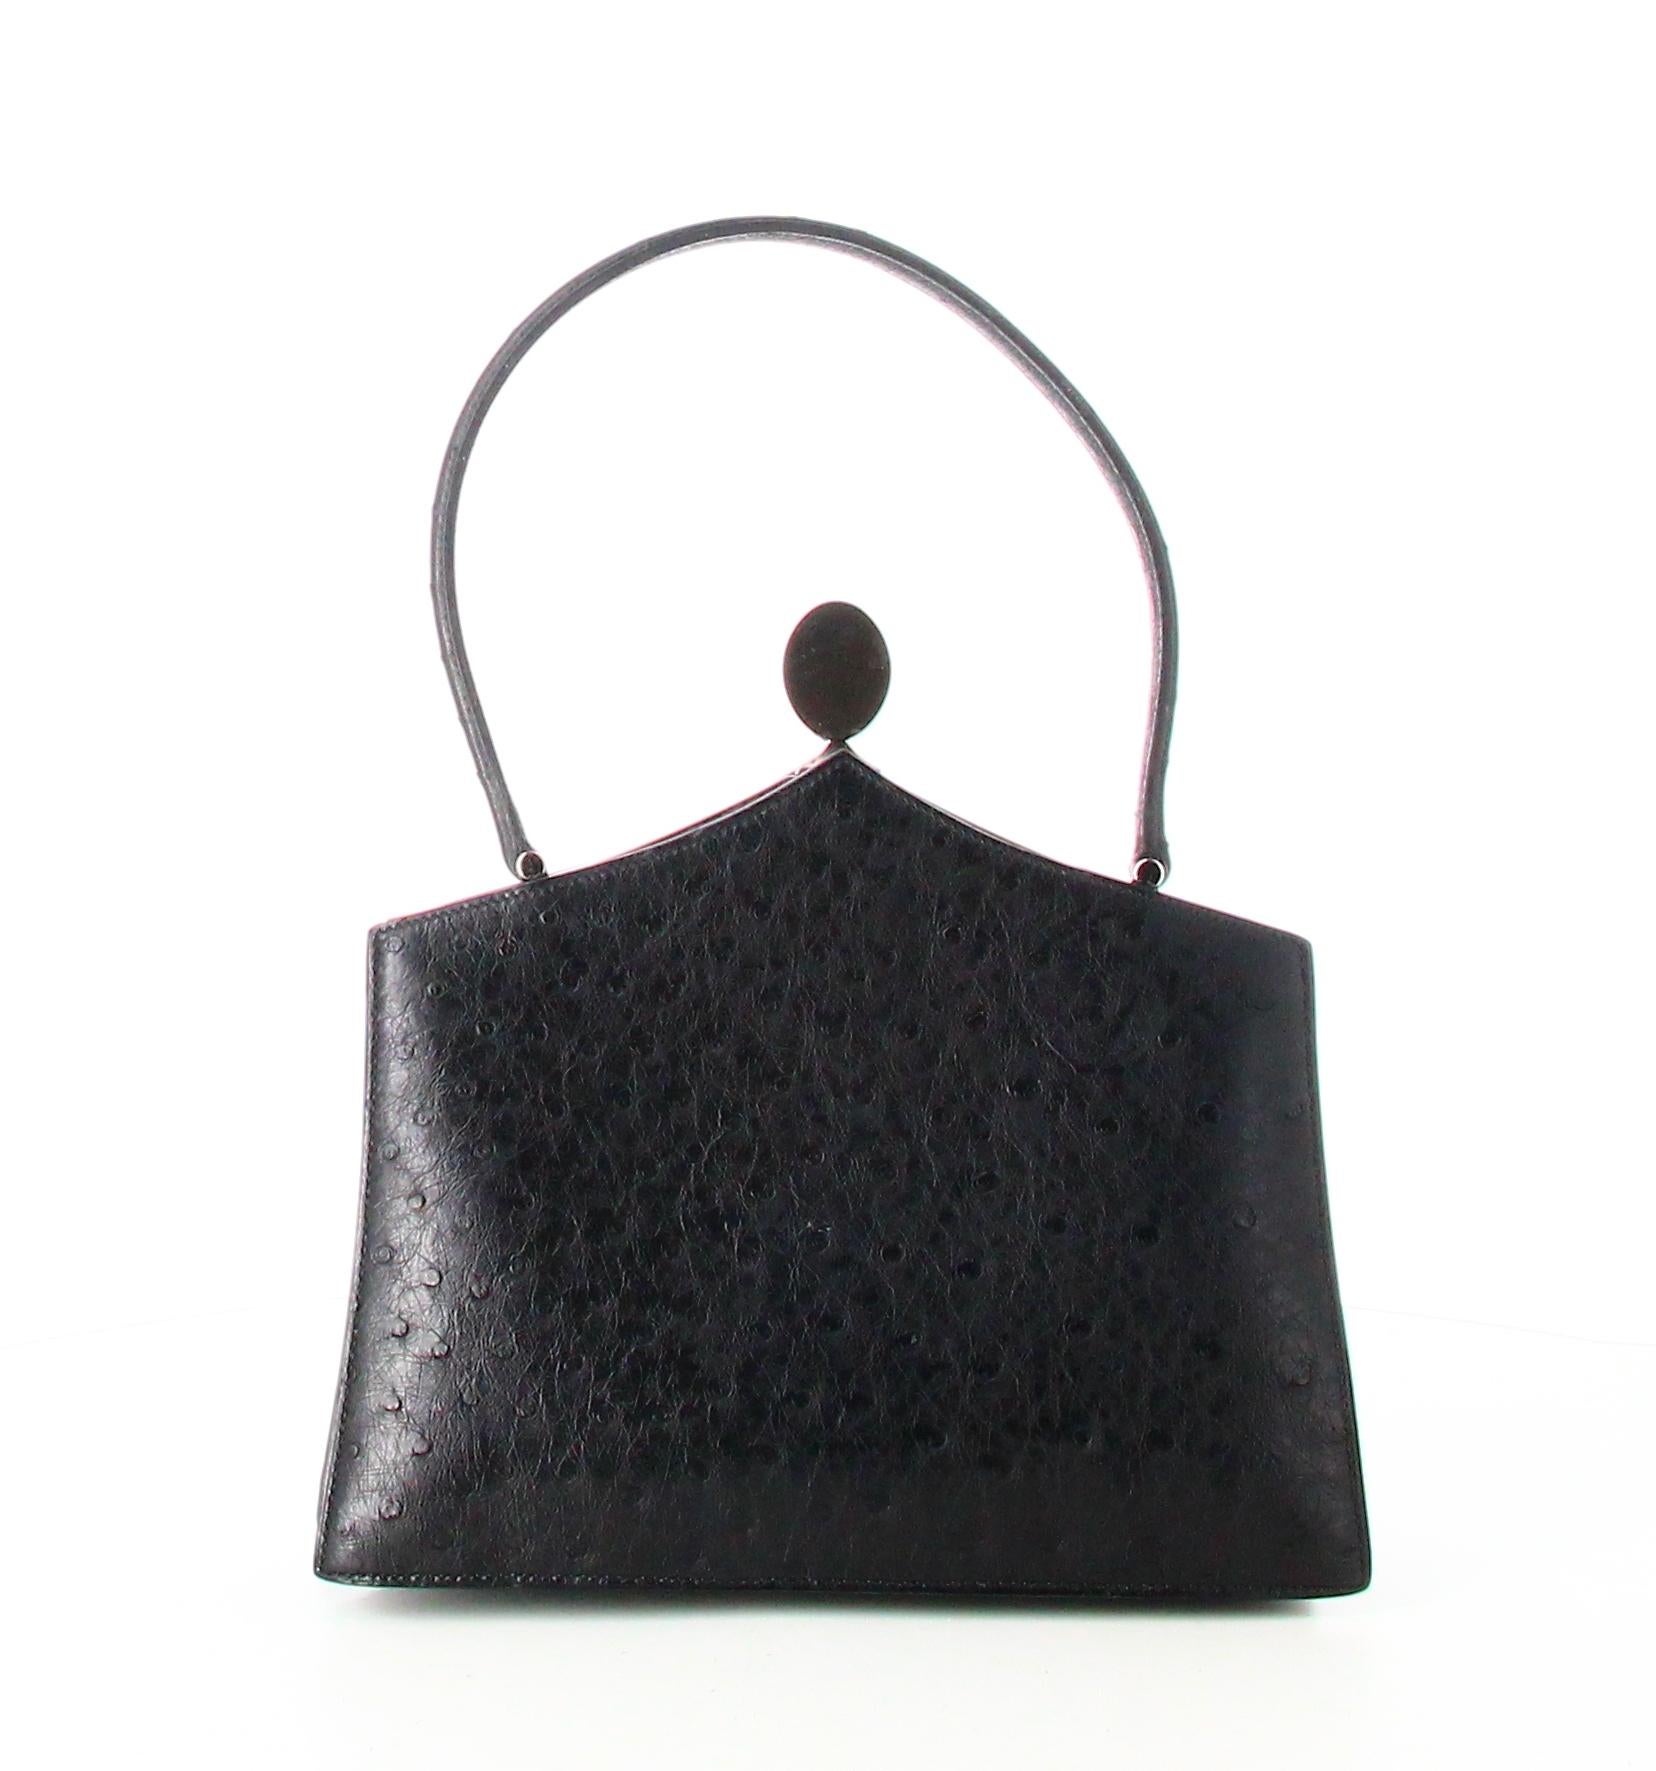 Hermès Mini Handbag Black Leather 

- Very good condition. Shows very slight signs of wear over time.
- Hermes Handbag 
- Black leather 
- Black leather hanse 
- Clasp: silver magnet 
- Interior: blue leather plus three inside pockets